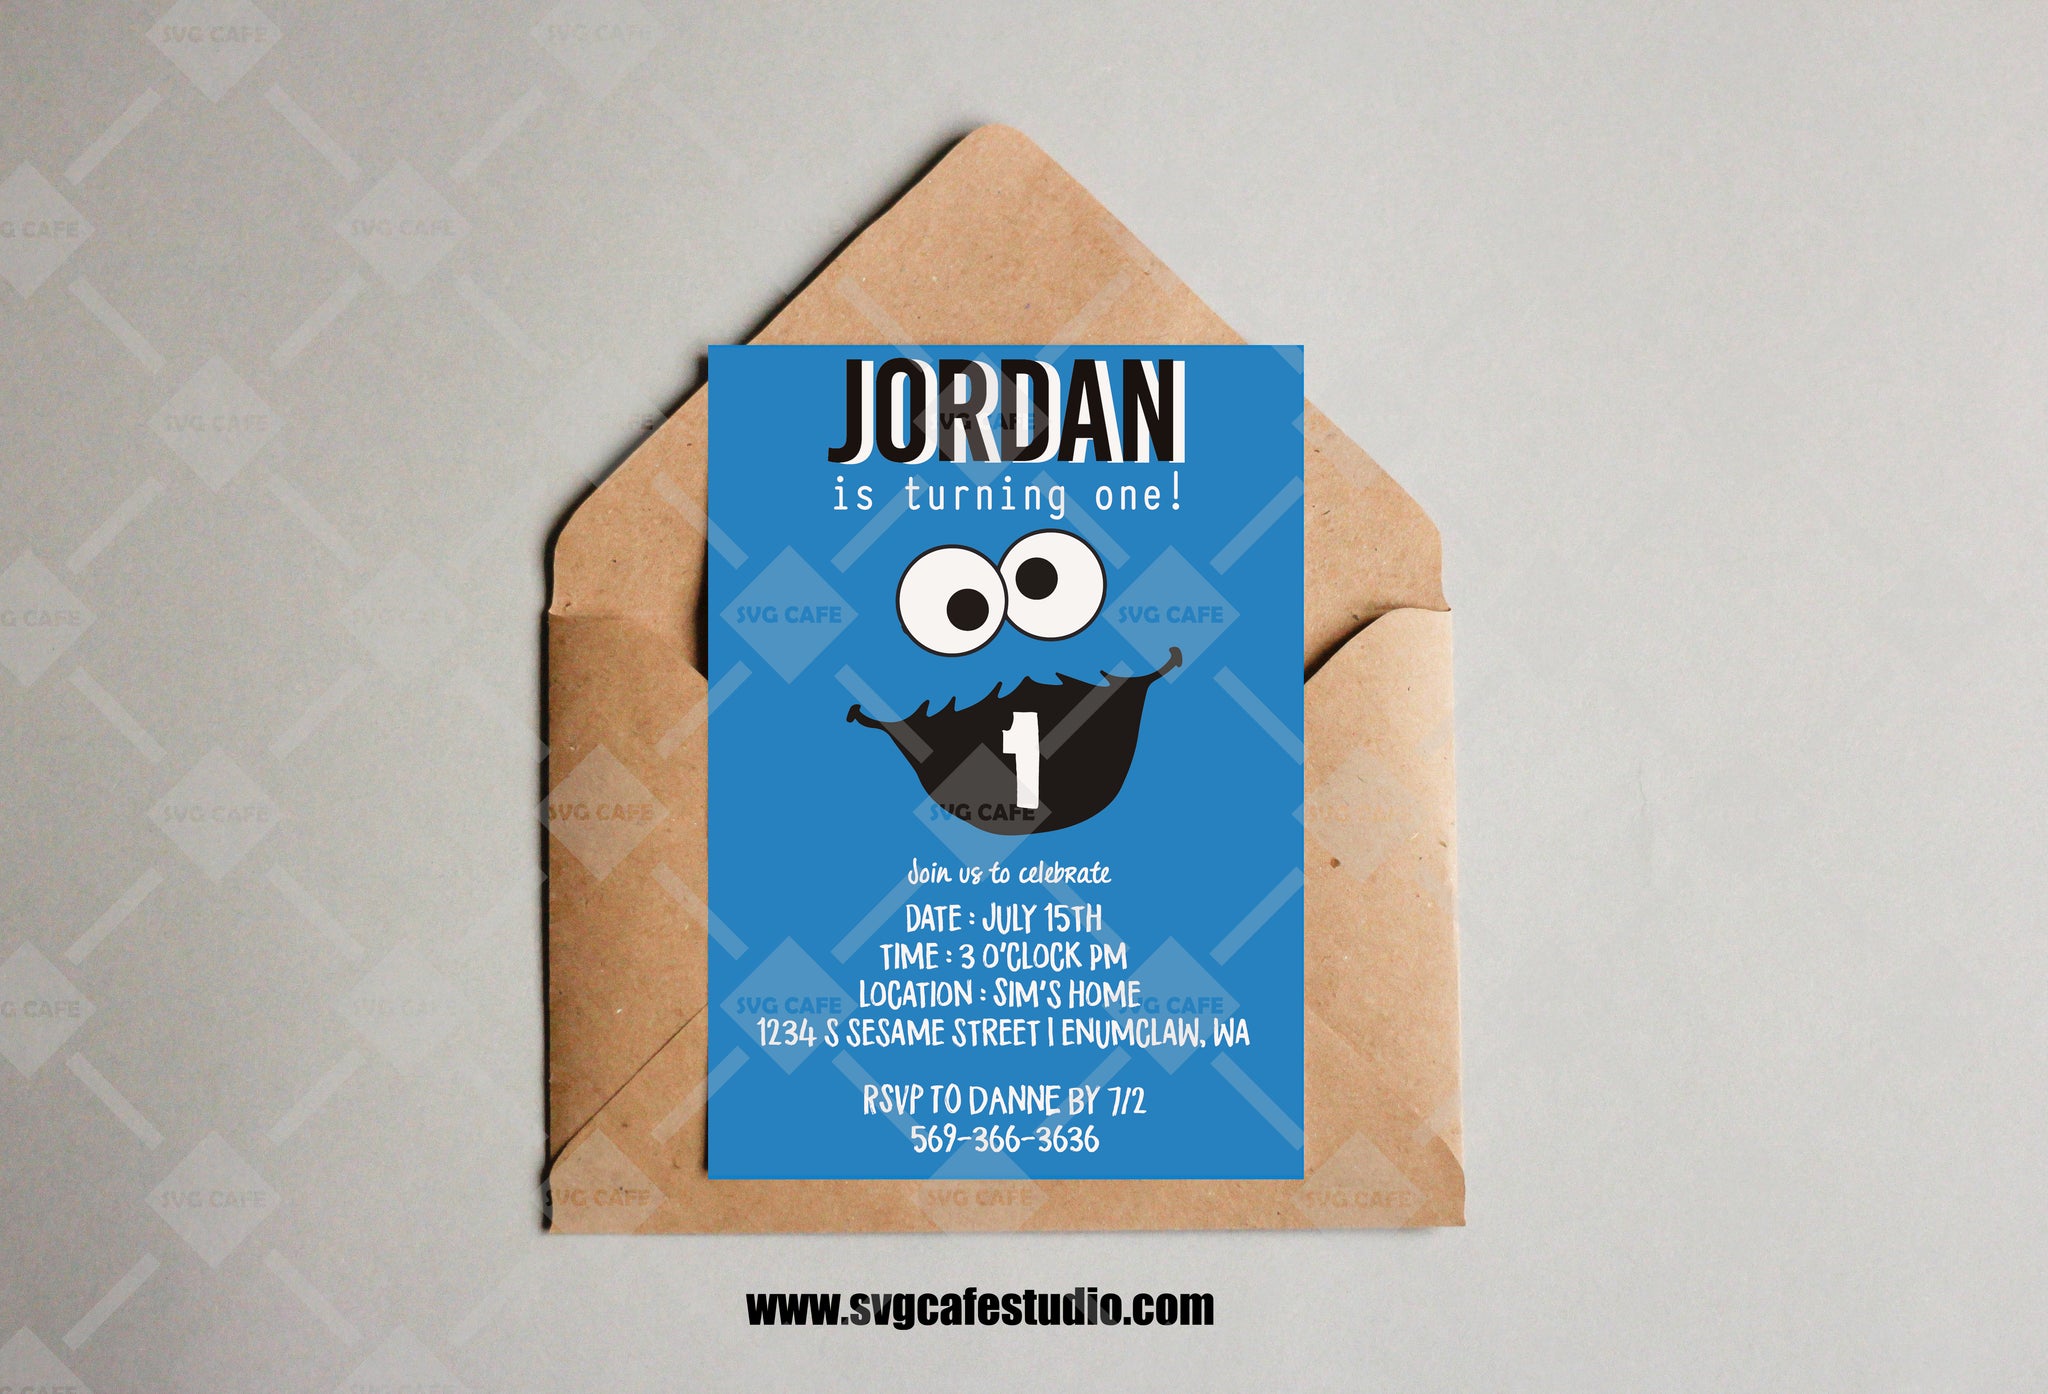 Cookie Monster Sesame Street Themed Birthday Invitation, Digital Download Party Invite, Any Age Birthday Flyer